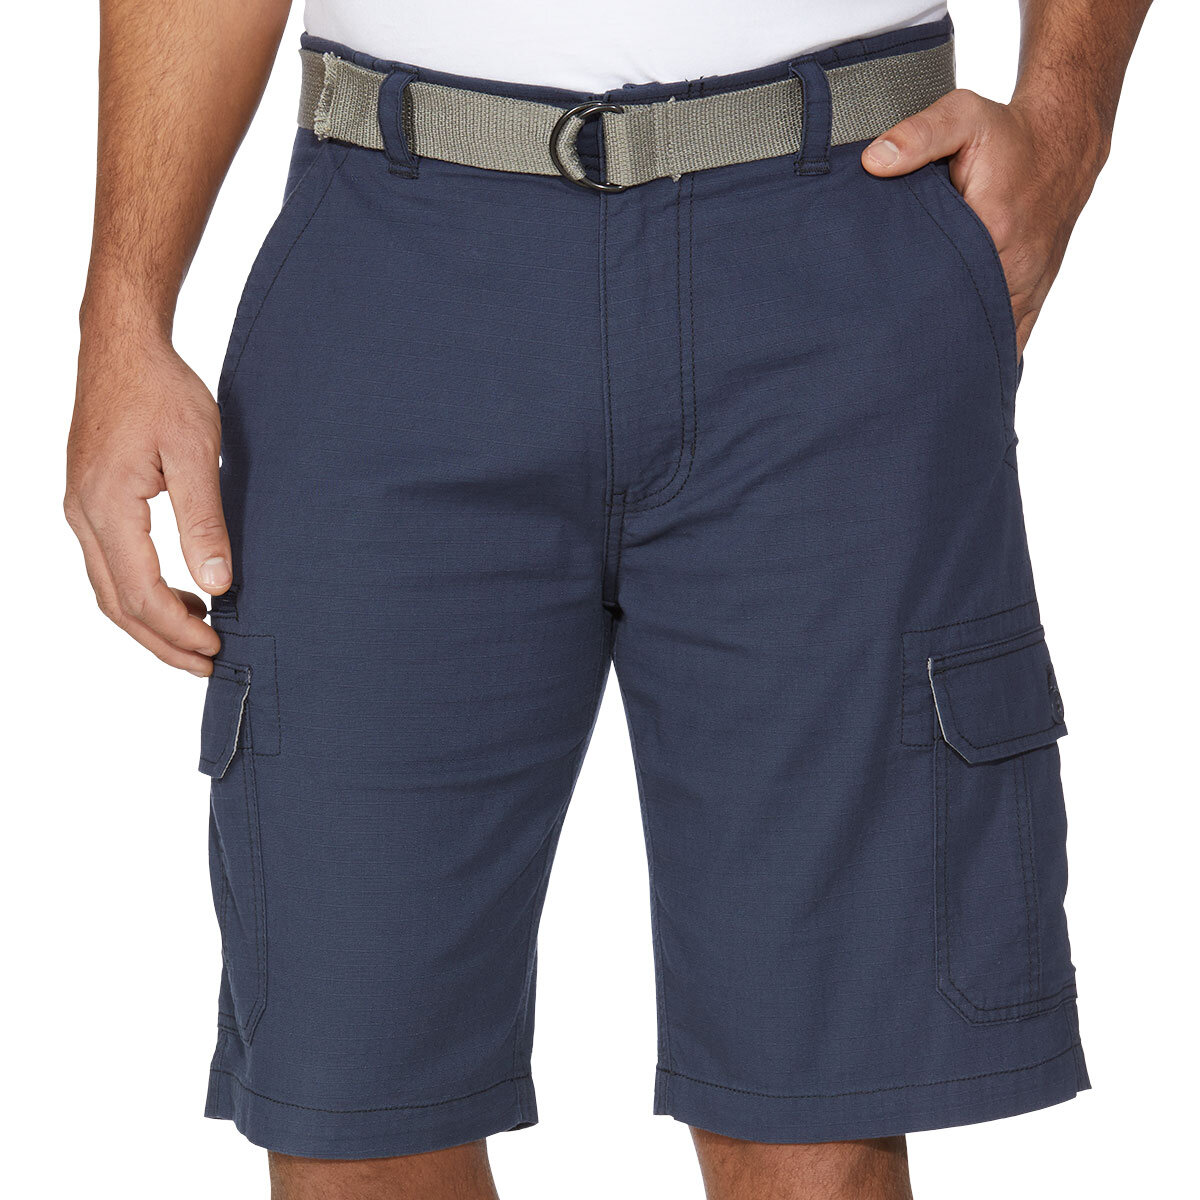 Front image of navy shorts